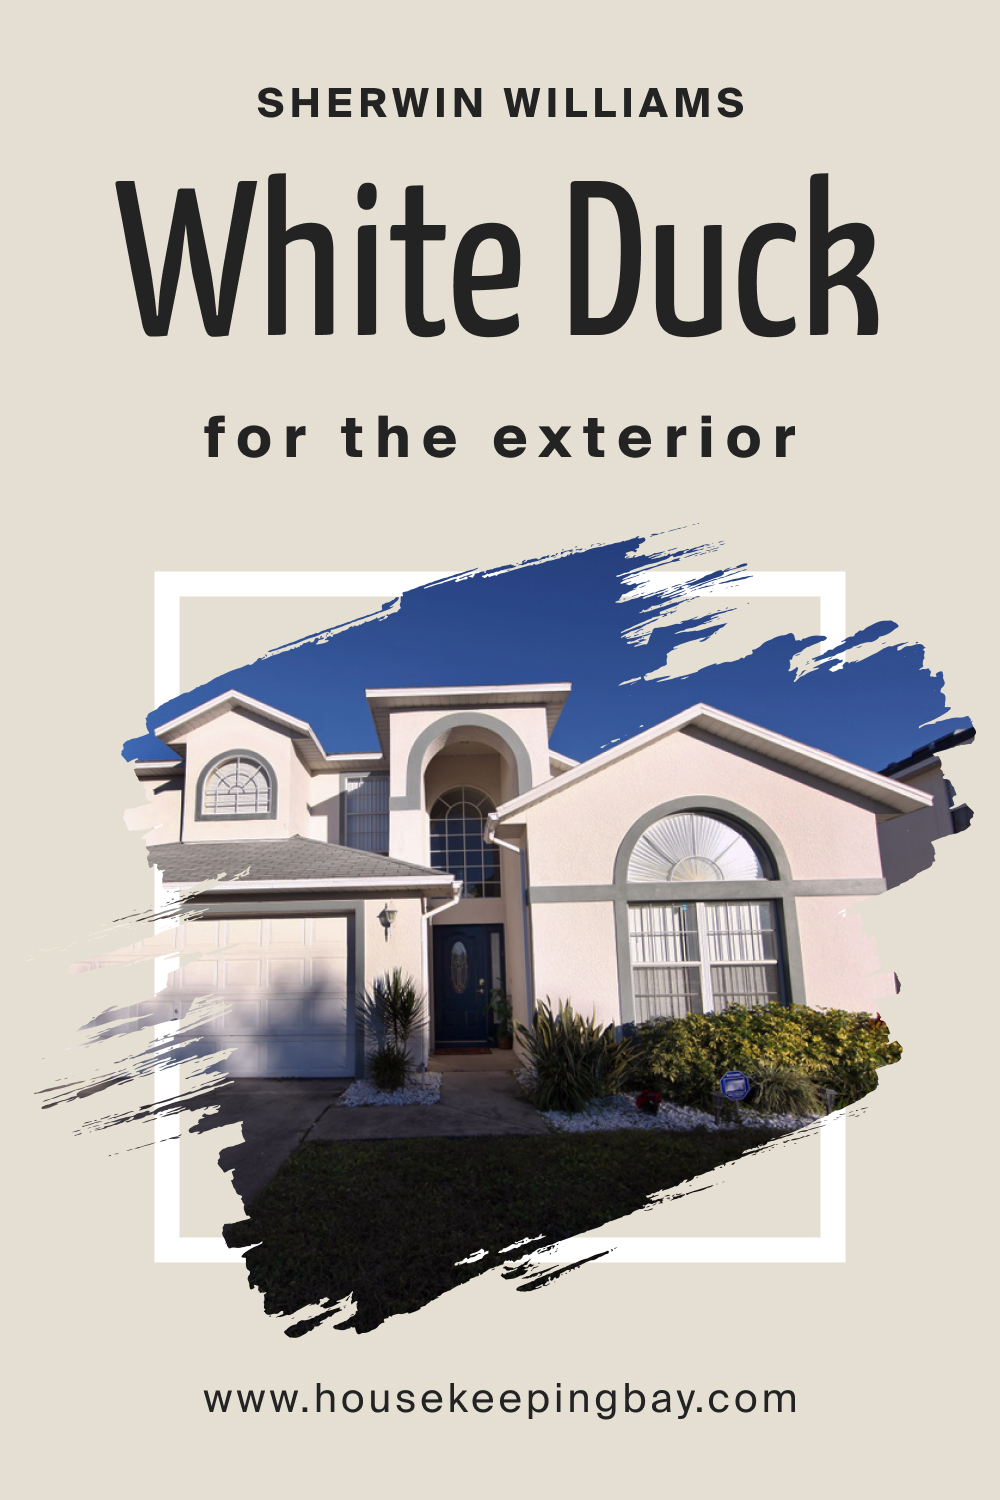 Sherwin Williams. SW White Duck For the exterior